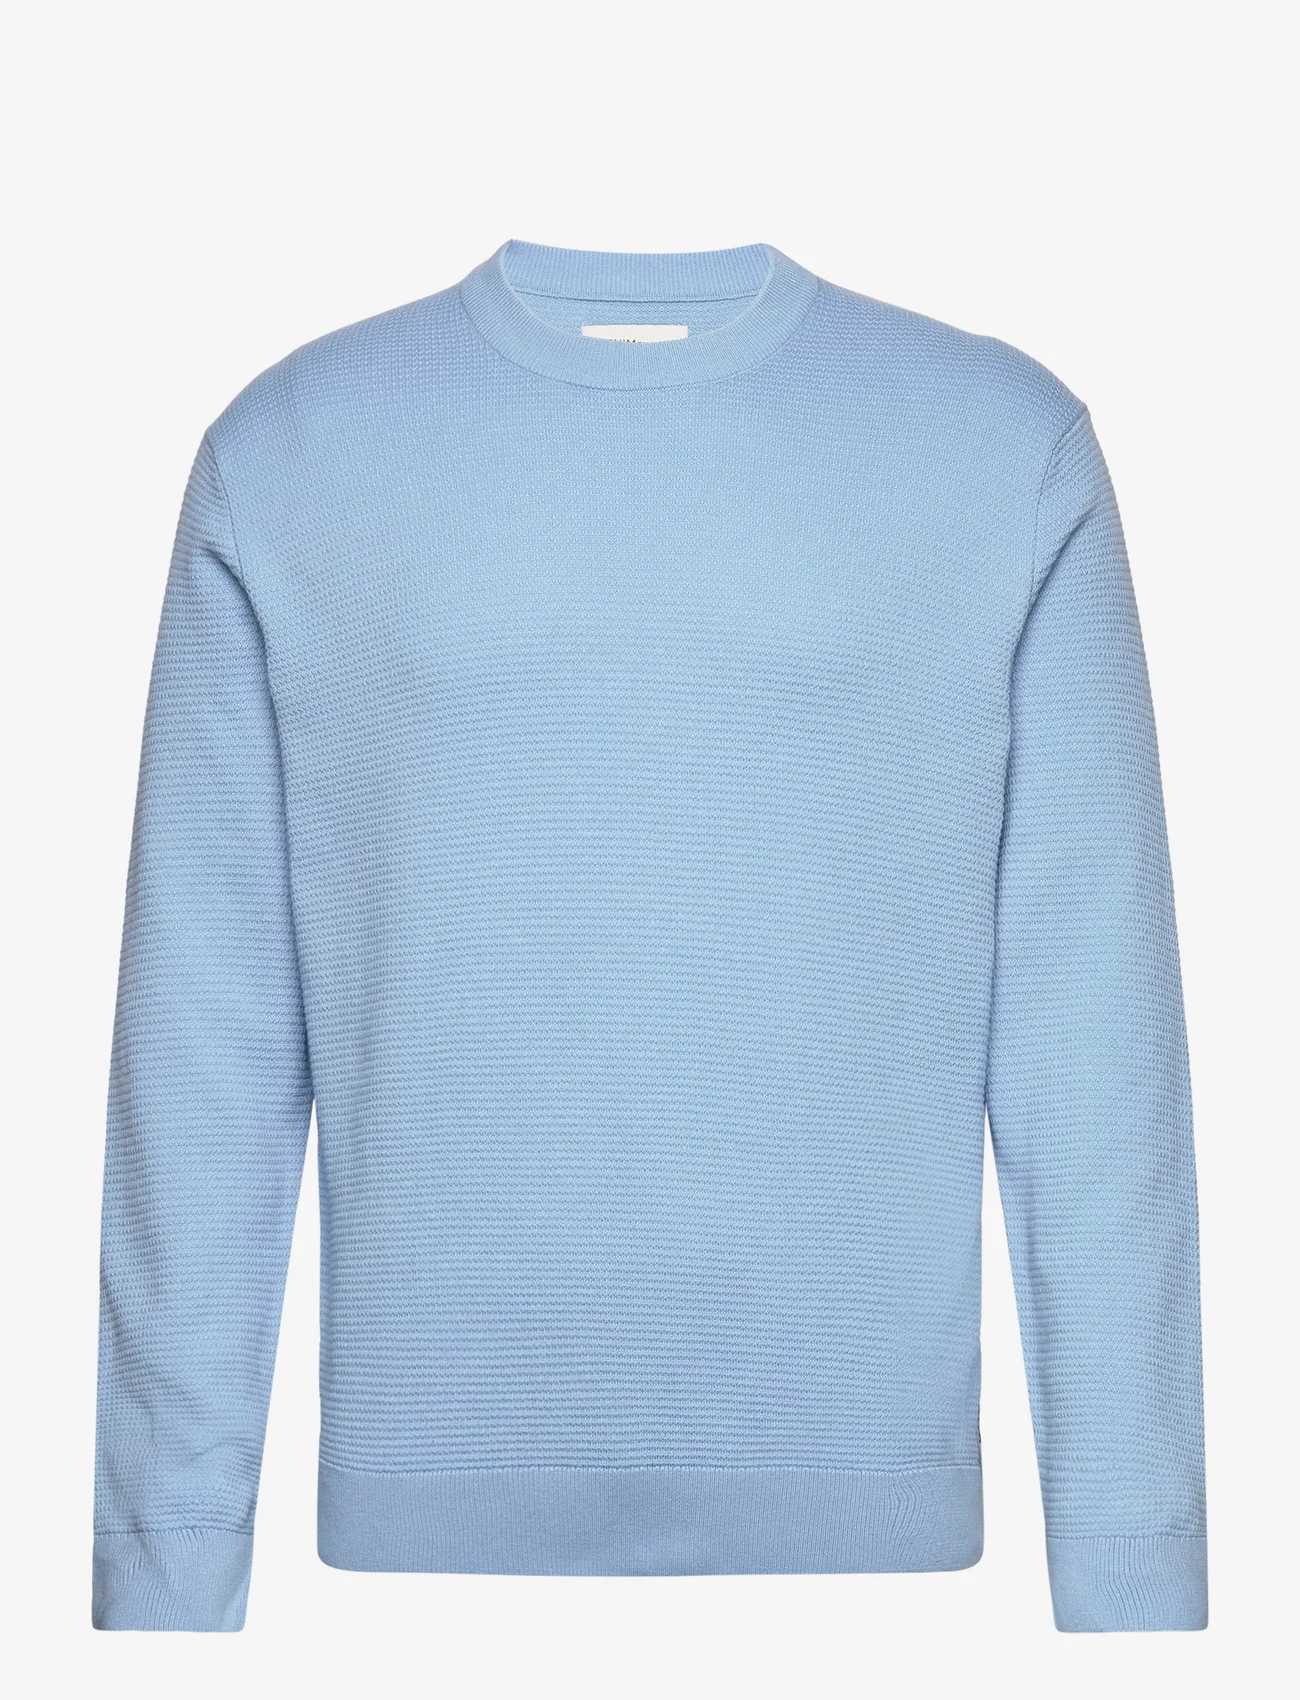 Tom Tailor - structured basic knit - knitted round necks - washed out middle blue - 0